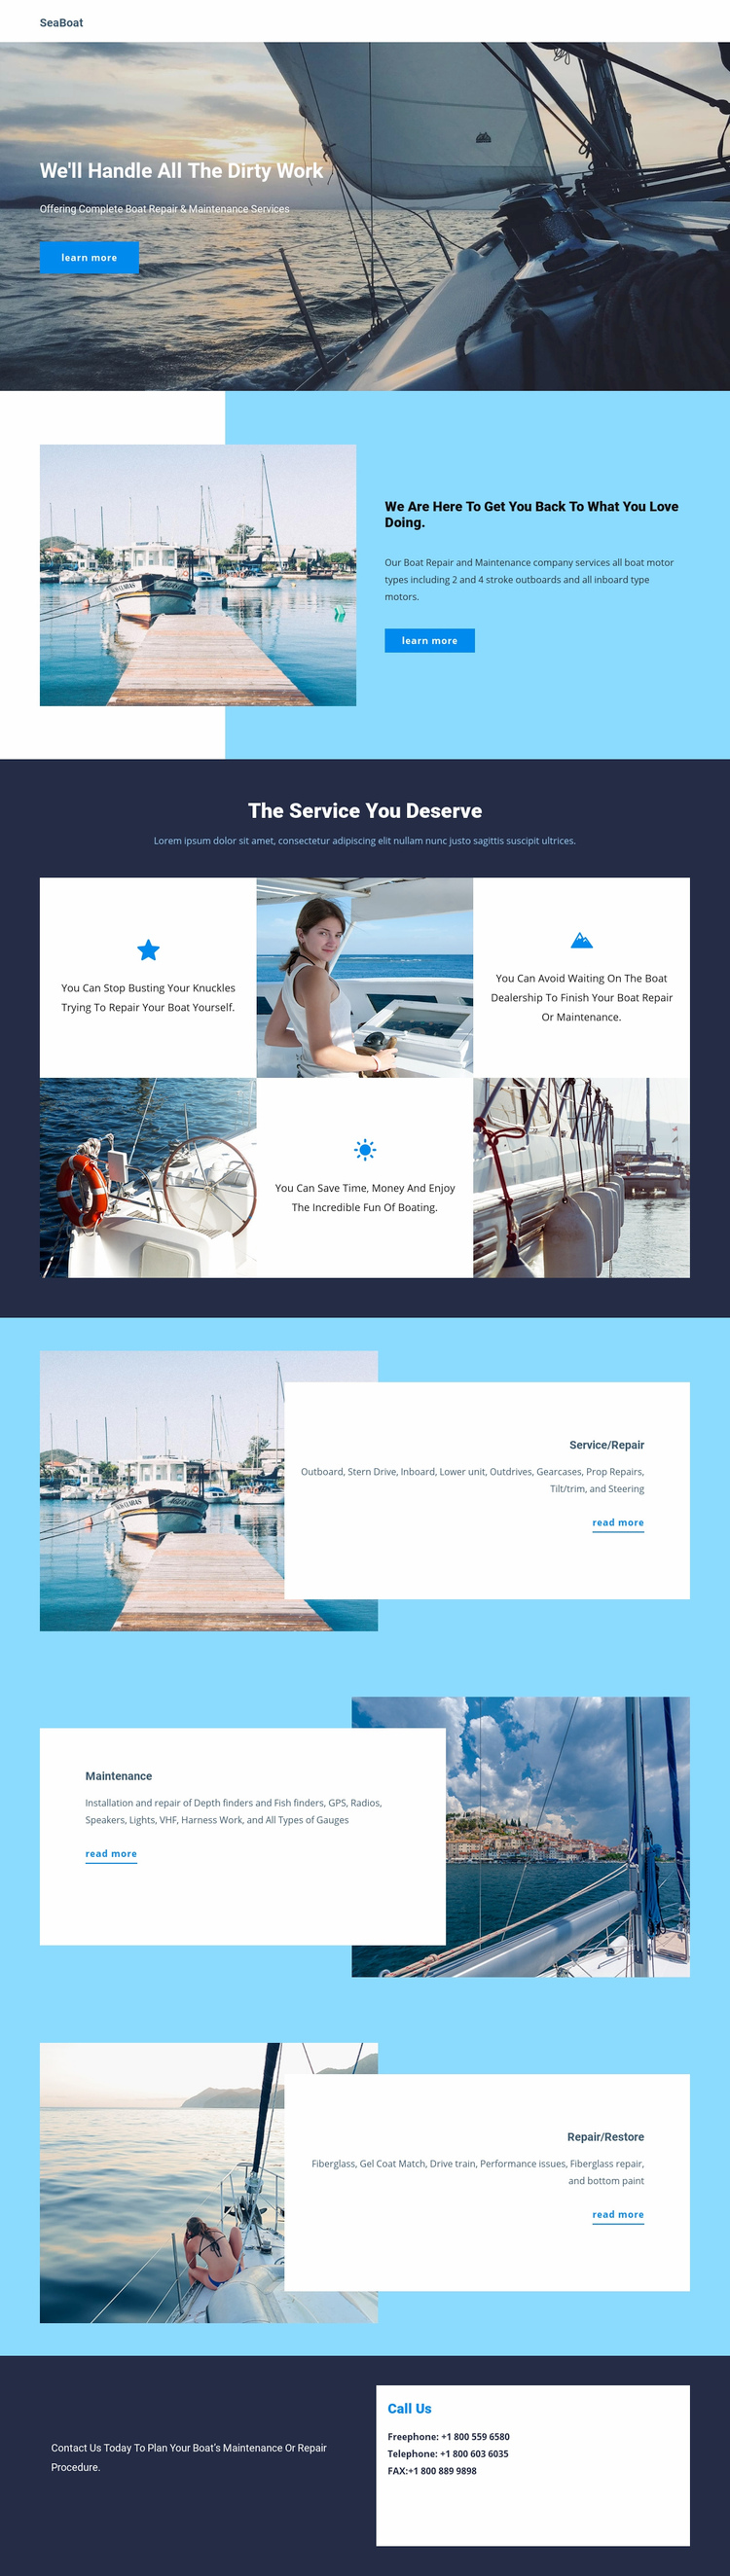 Travel on Seaboat Squarespace Template Alternative